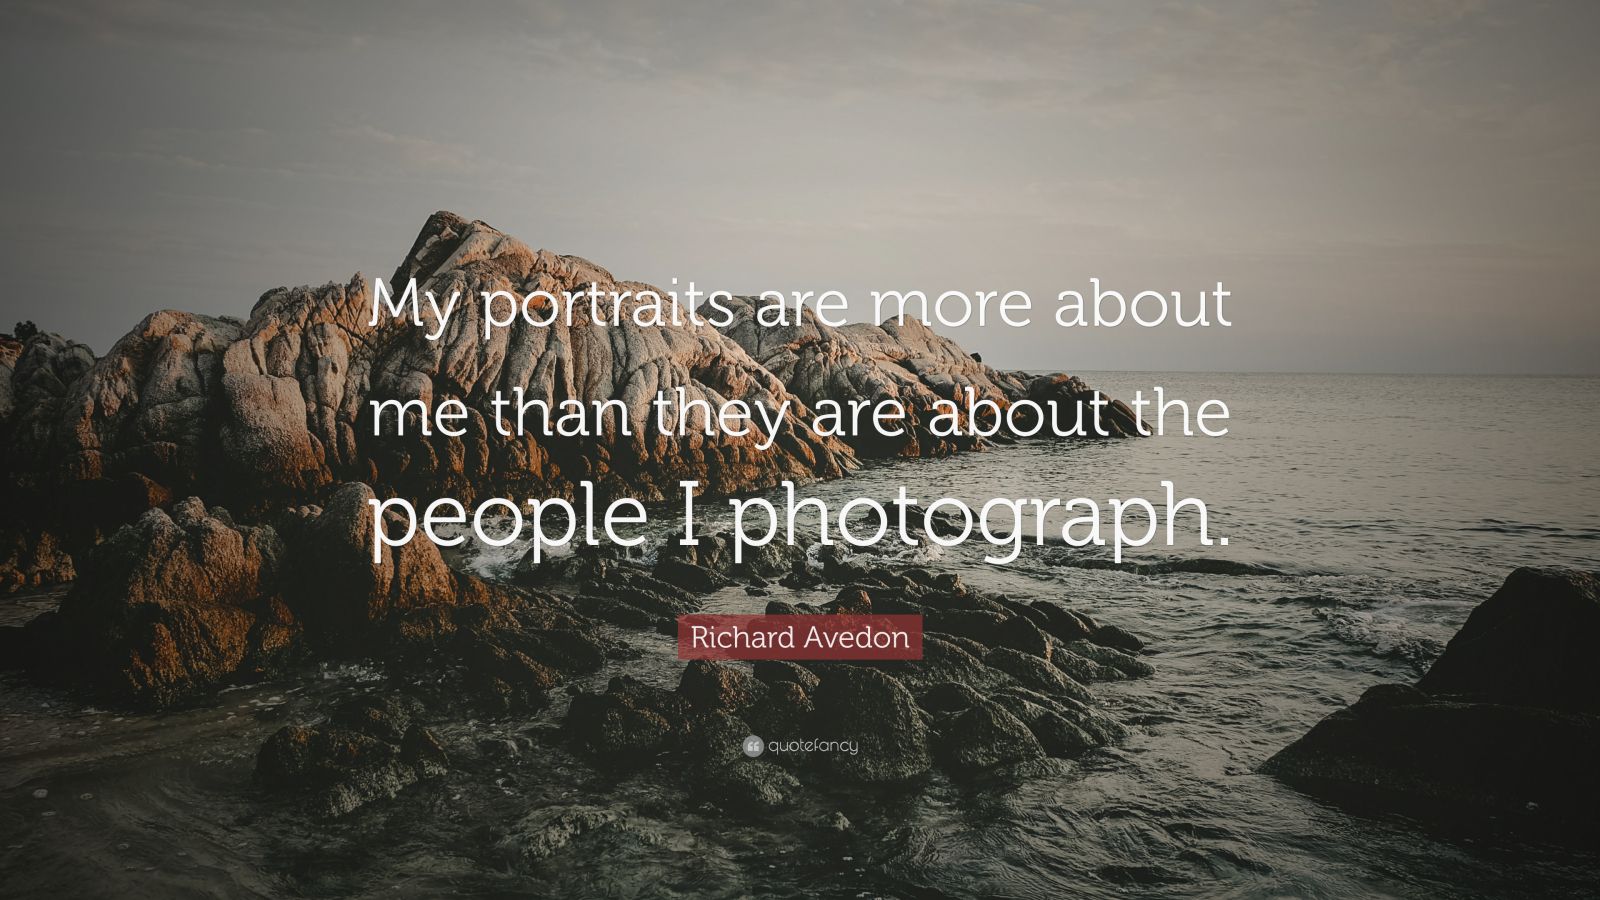 Richard Avedon Quote: “My portraits are more about me than they are ...